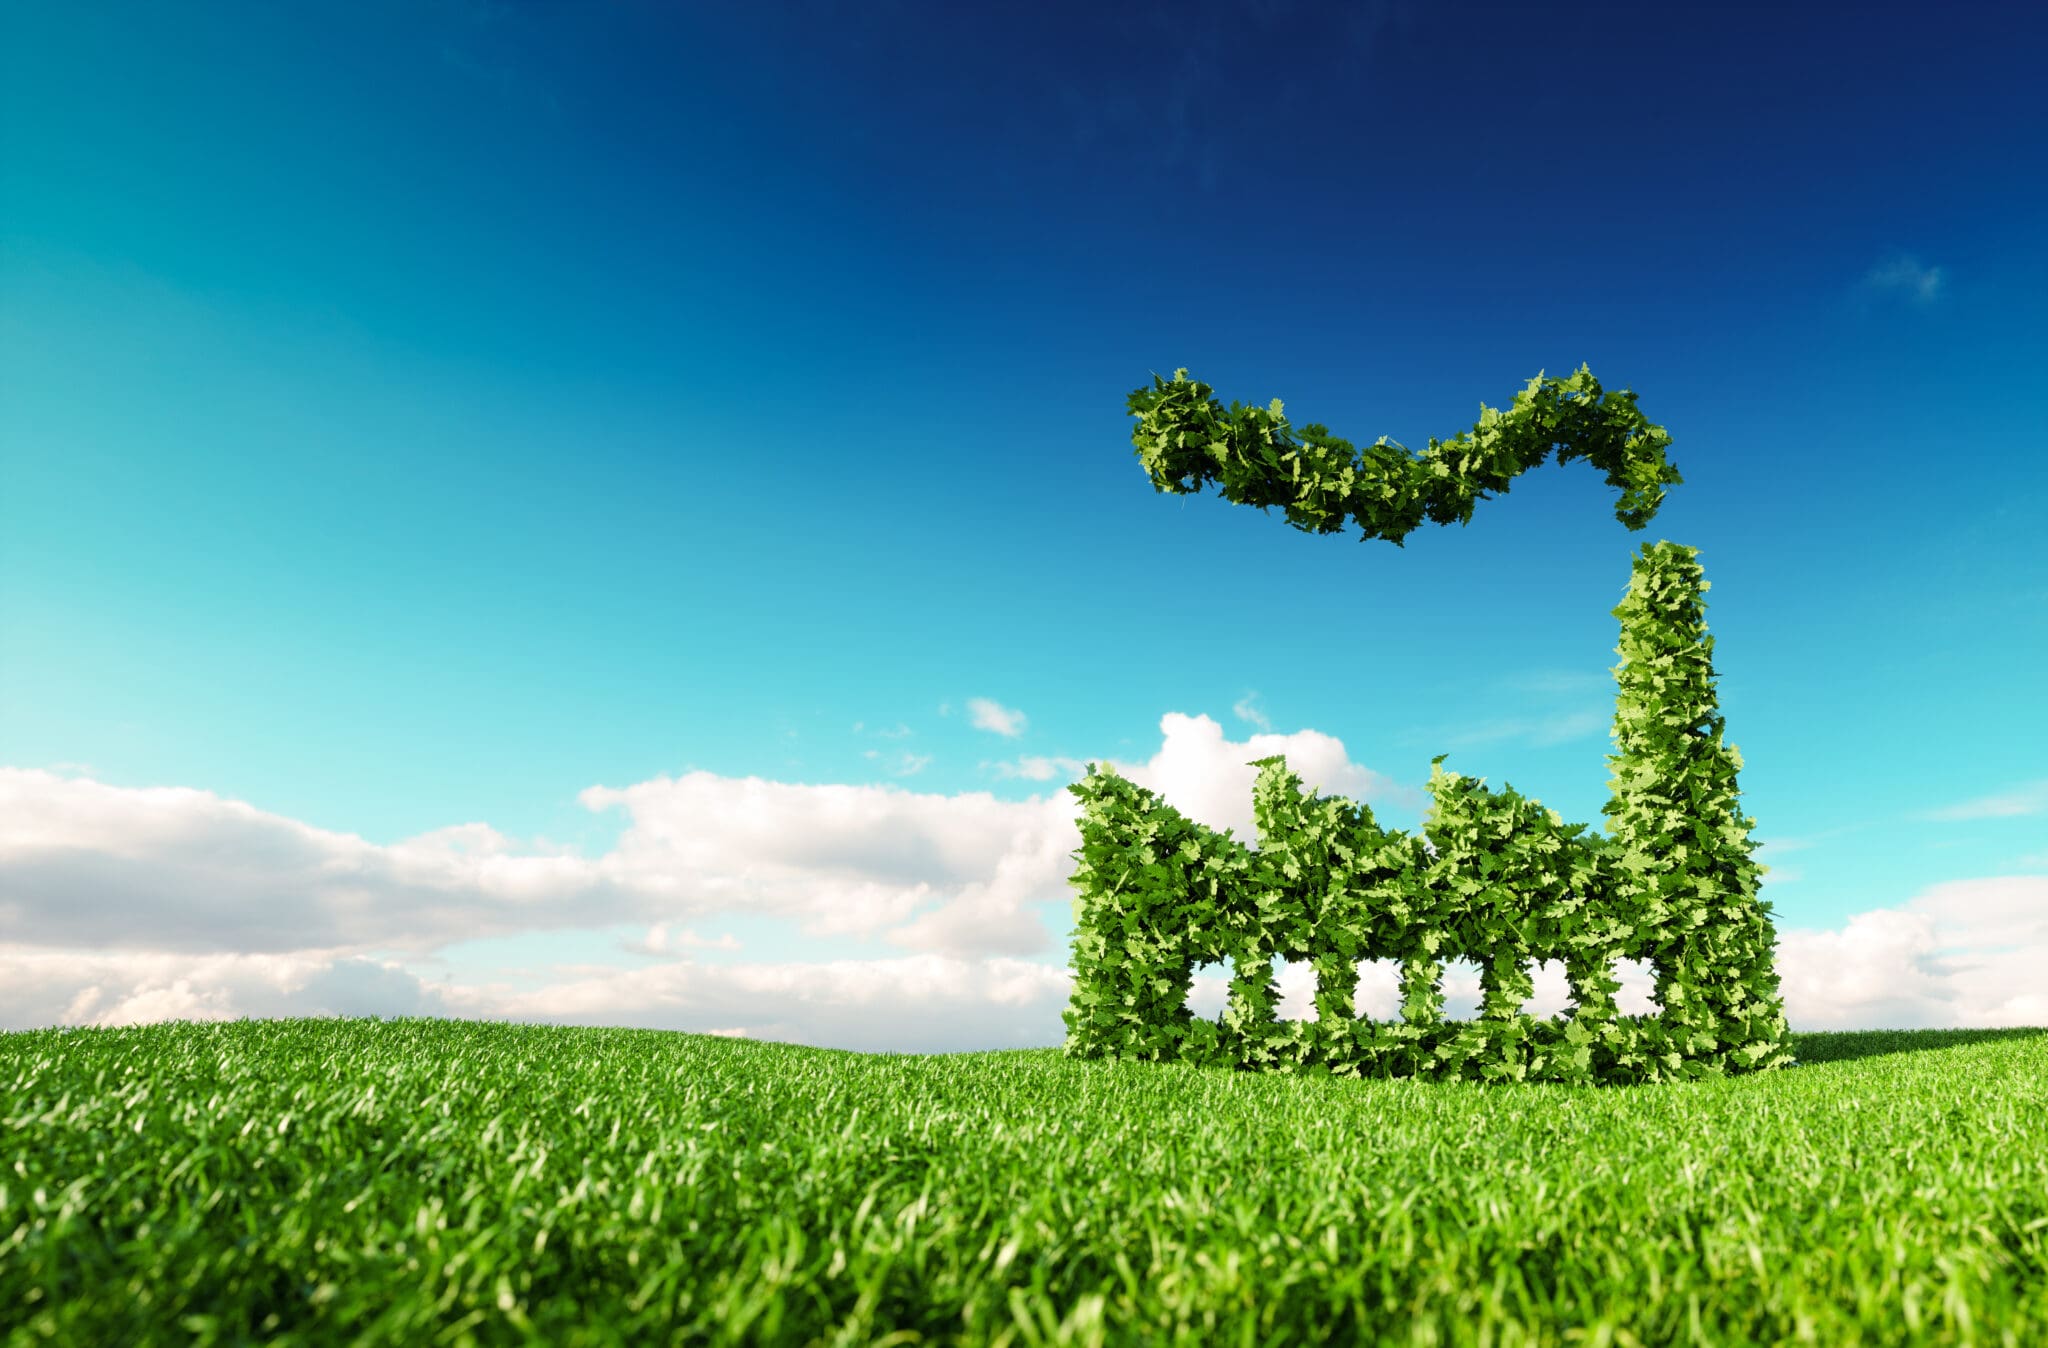 Brilliant ways to improve your sustainability credentials and grow your business